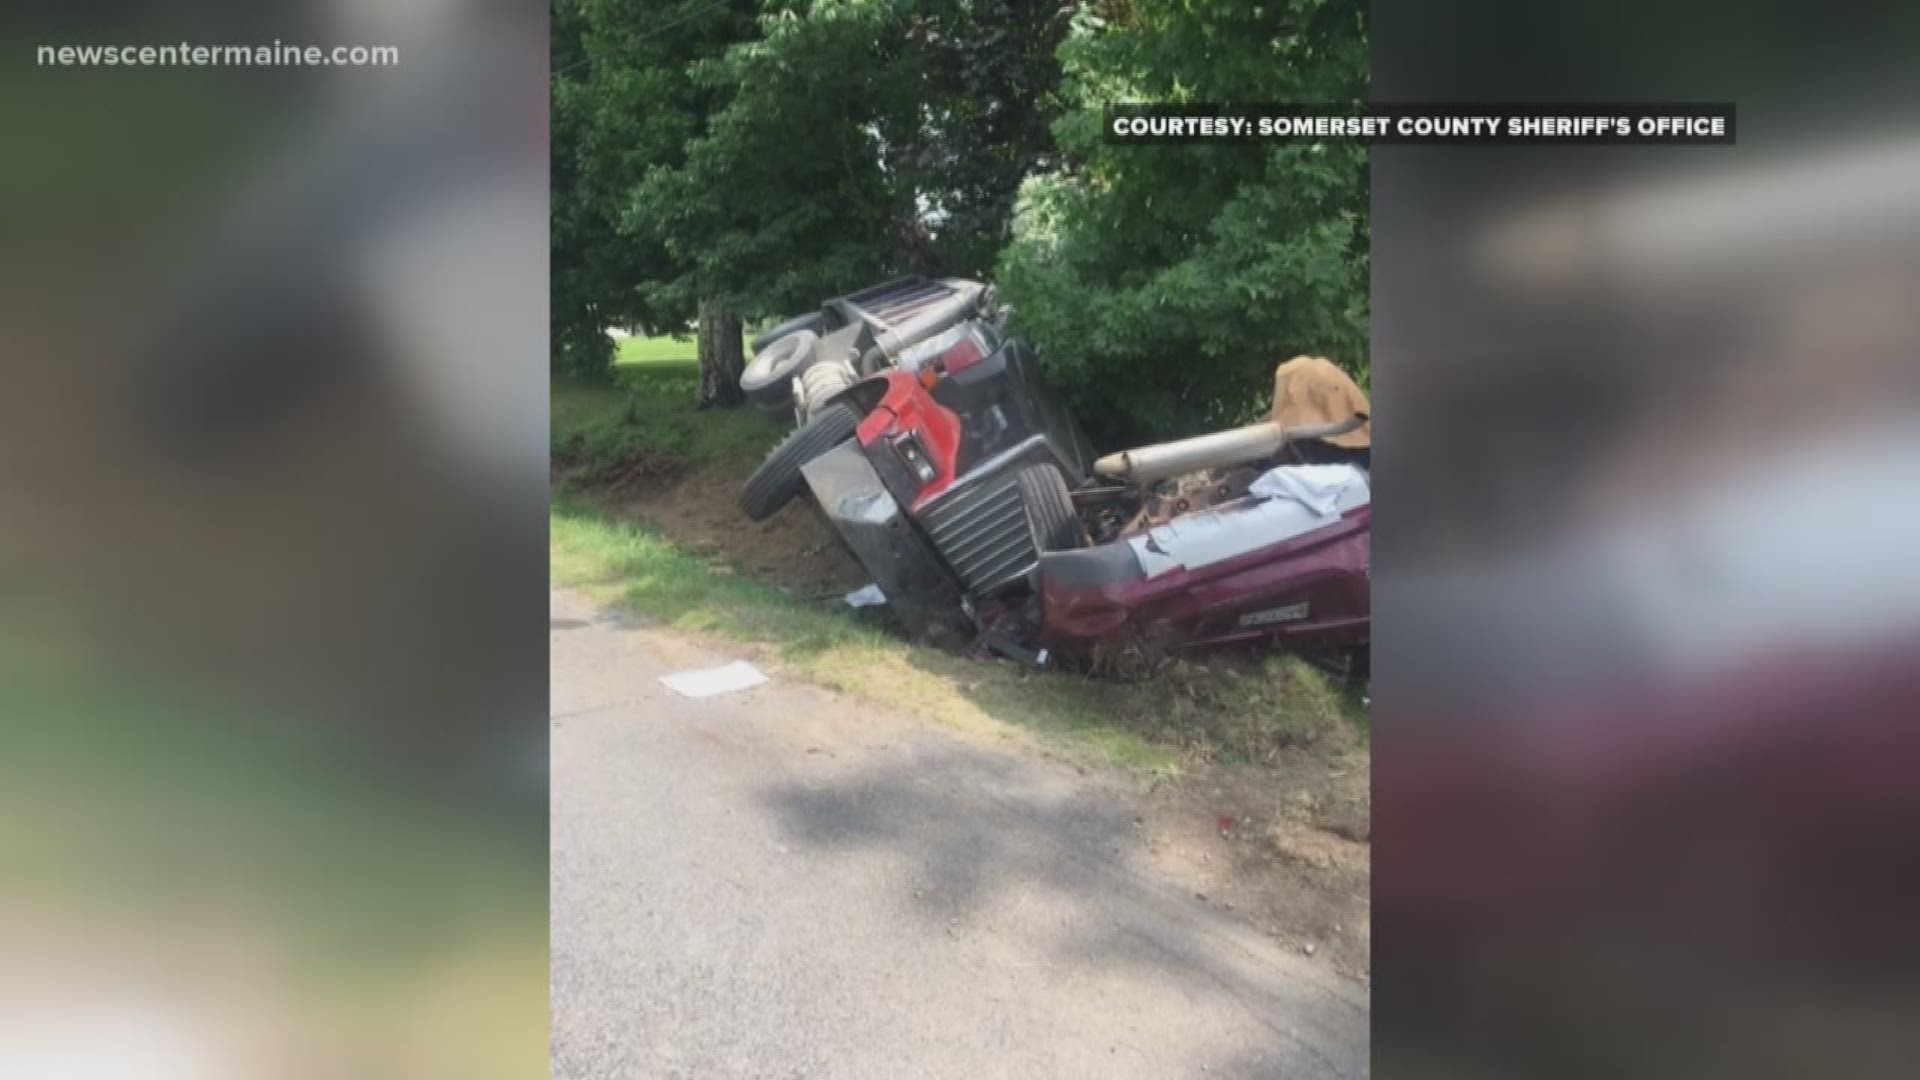 A crash with a dump truck killed a husband and wife in Madison. 85-year-old Joyce Gipson and her husband 80-year-old Keith Blackwell were driving on Ward Hill Road when Gipson tried to make a left turn, a dump truck carrying a load of crushed stone hit their car.